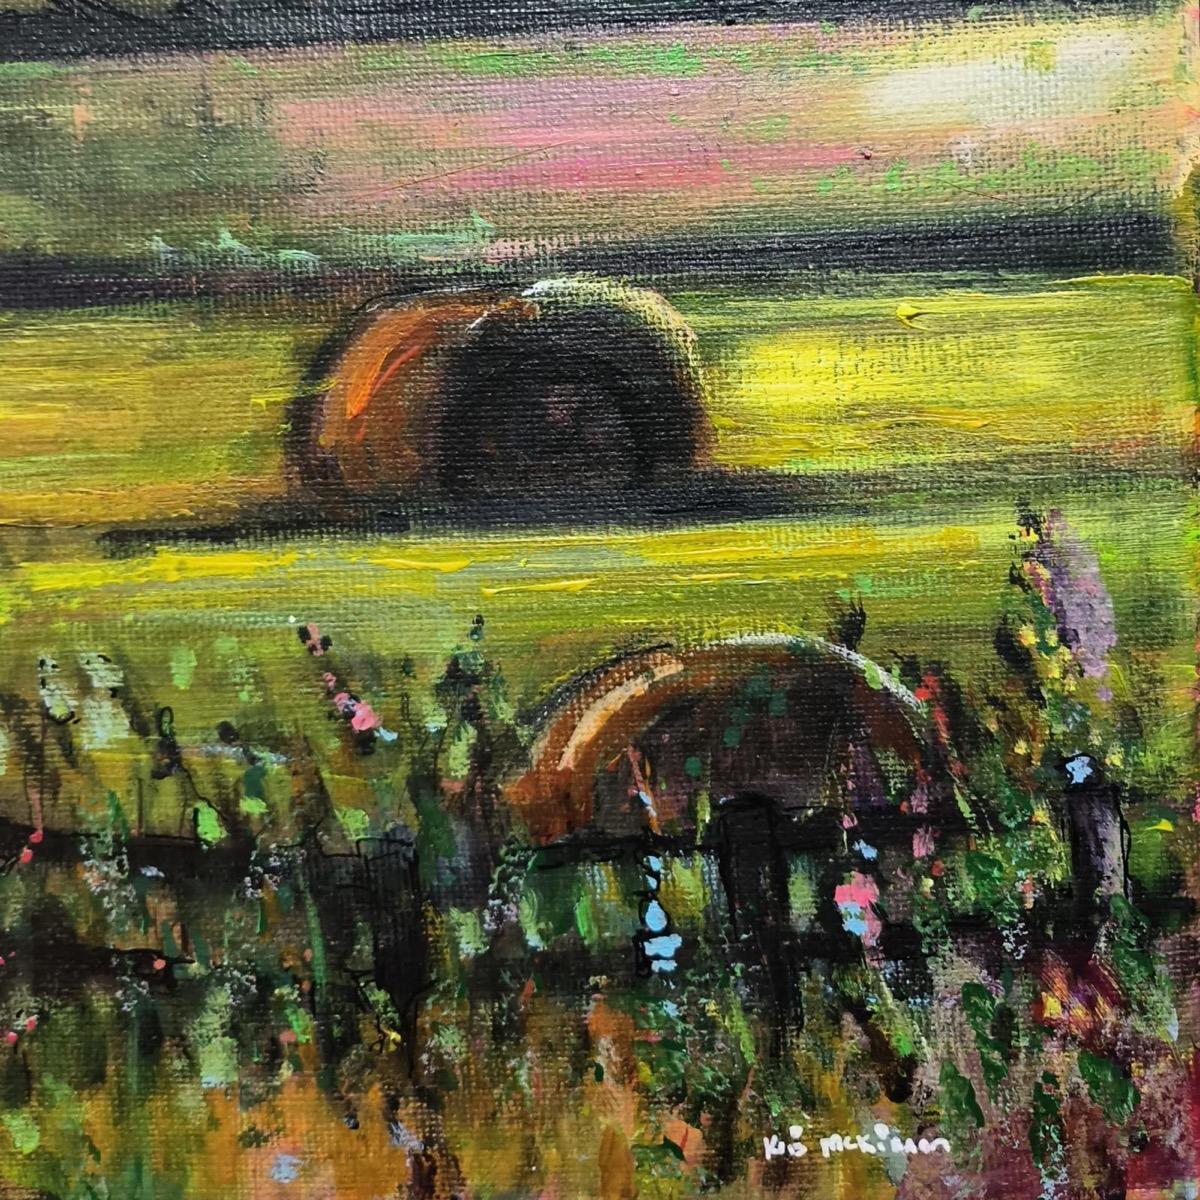 Spring Fields - 1, Cotswolds, Original painting, Countryside, Rural - Abstract Painting by Kris McKinnon